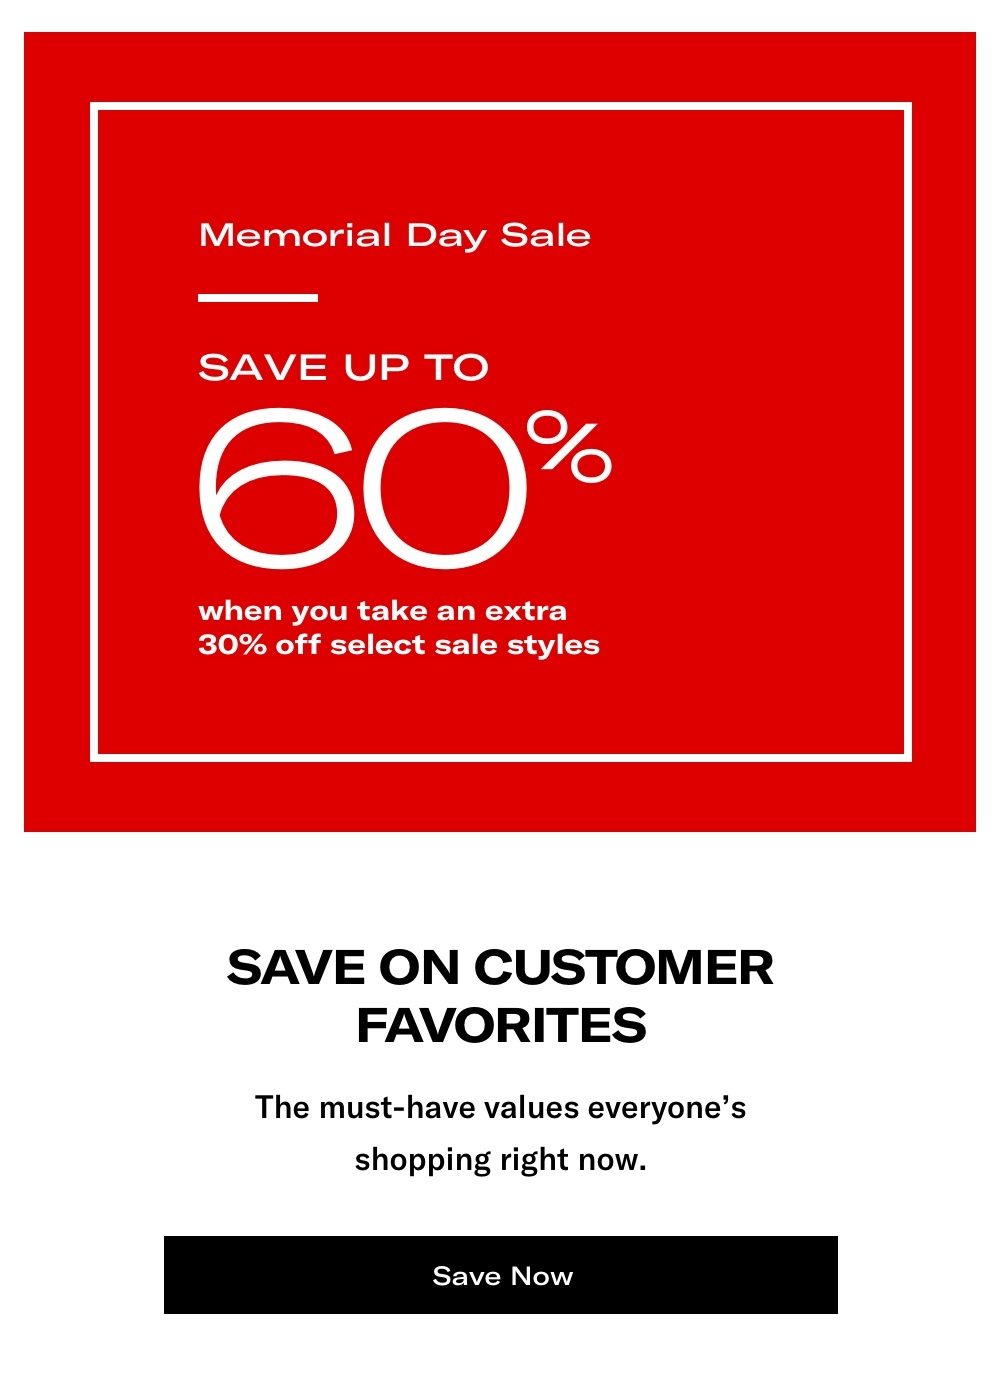 Shop the Memorial Day Sale - Start Now